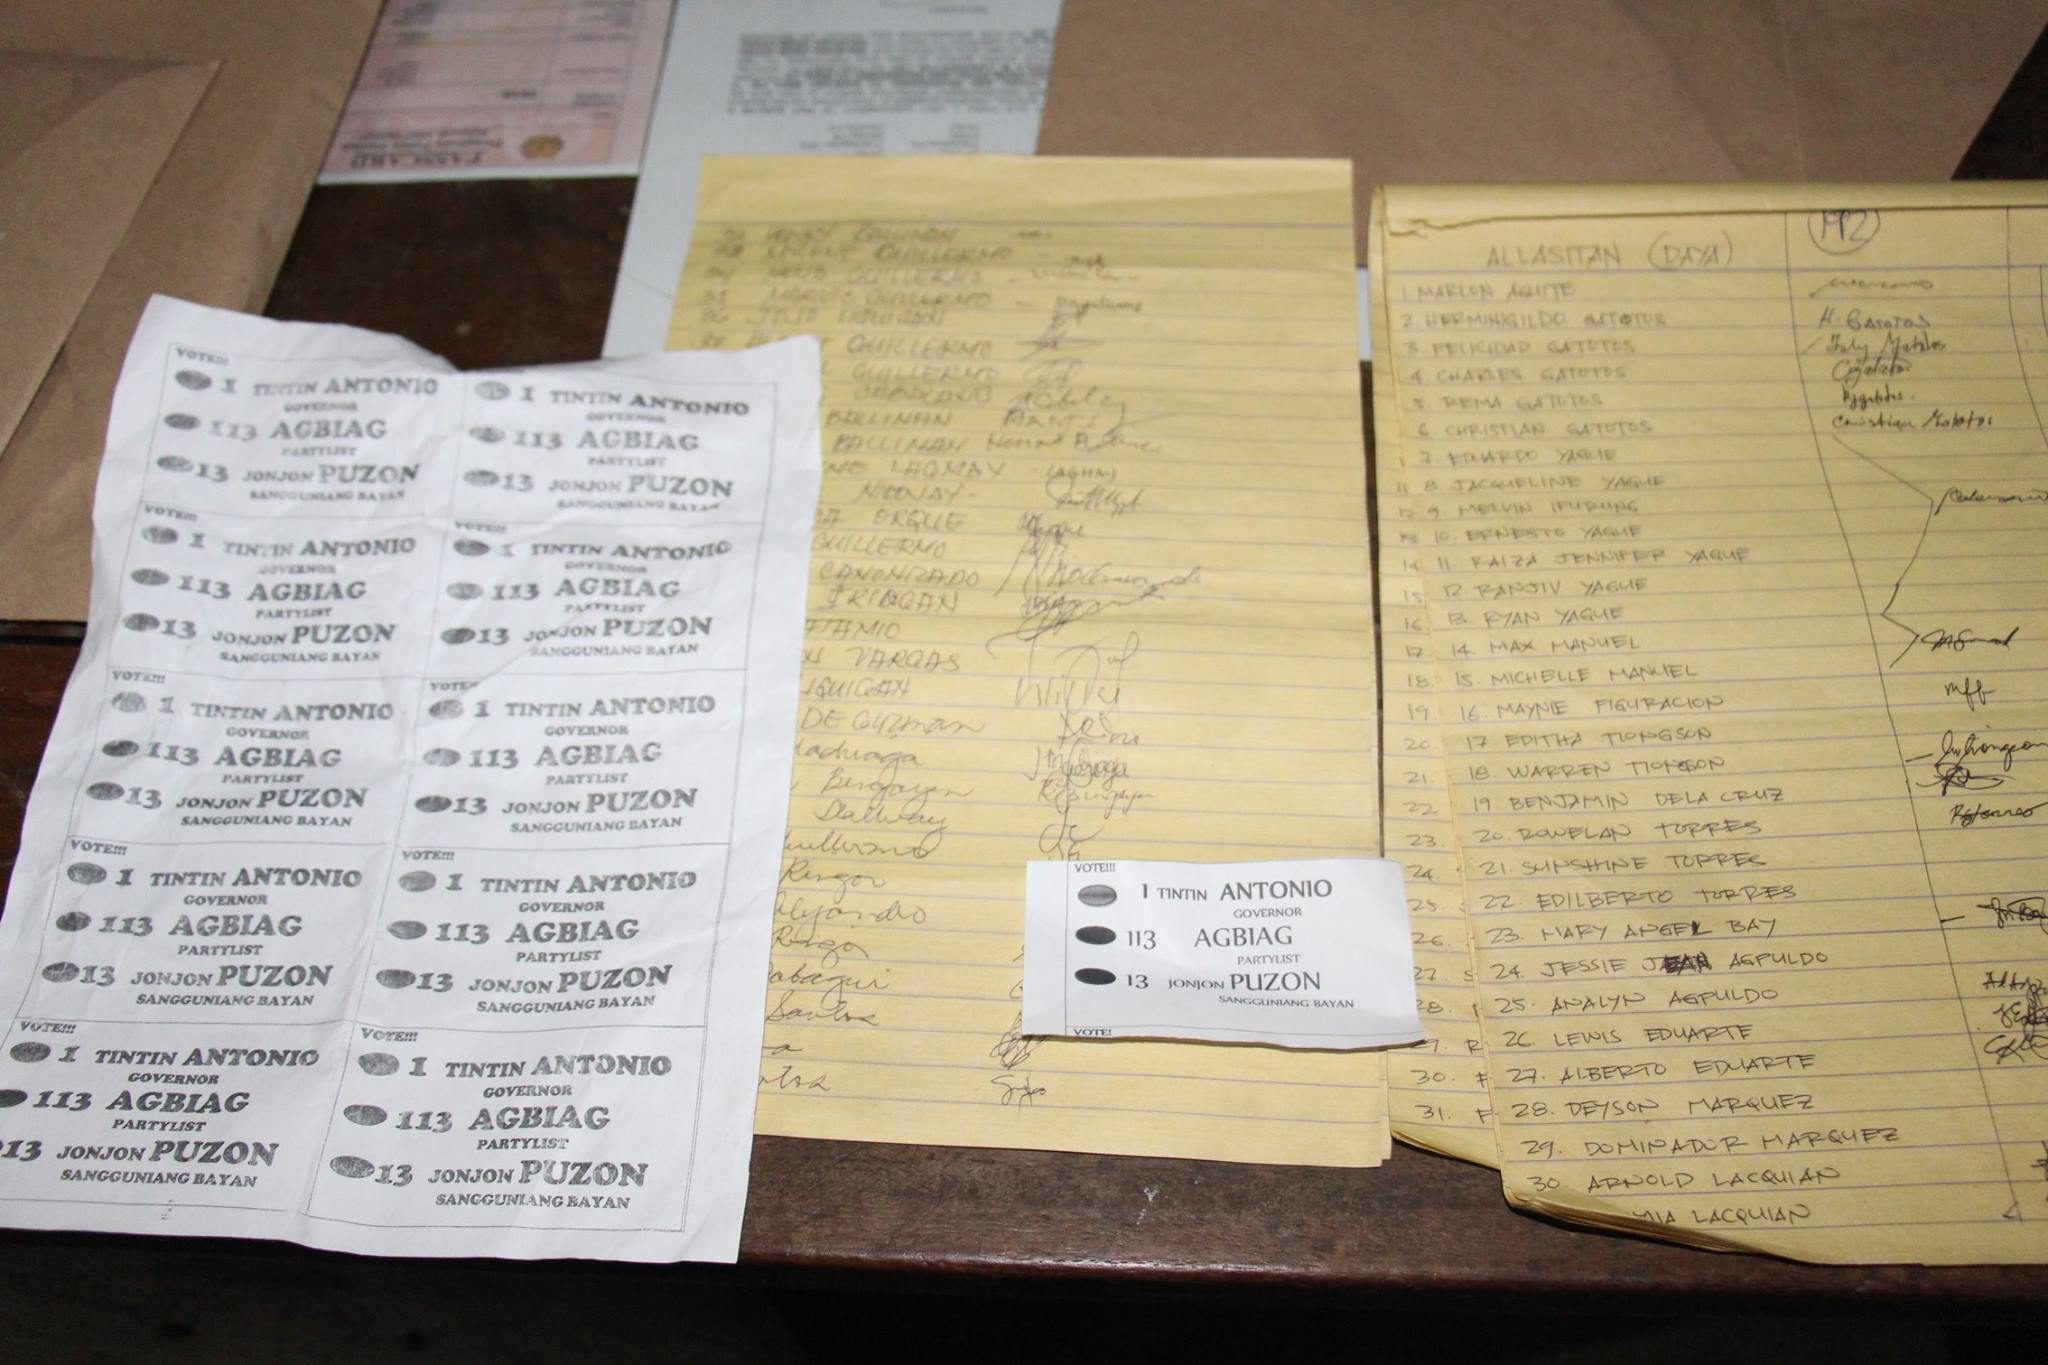 Alleged voters' and recipients' lists were recovered following a raid on a home. Photo from Manuel Mamba's Facebook 